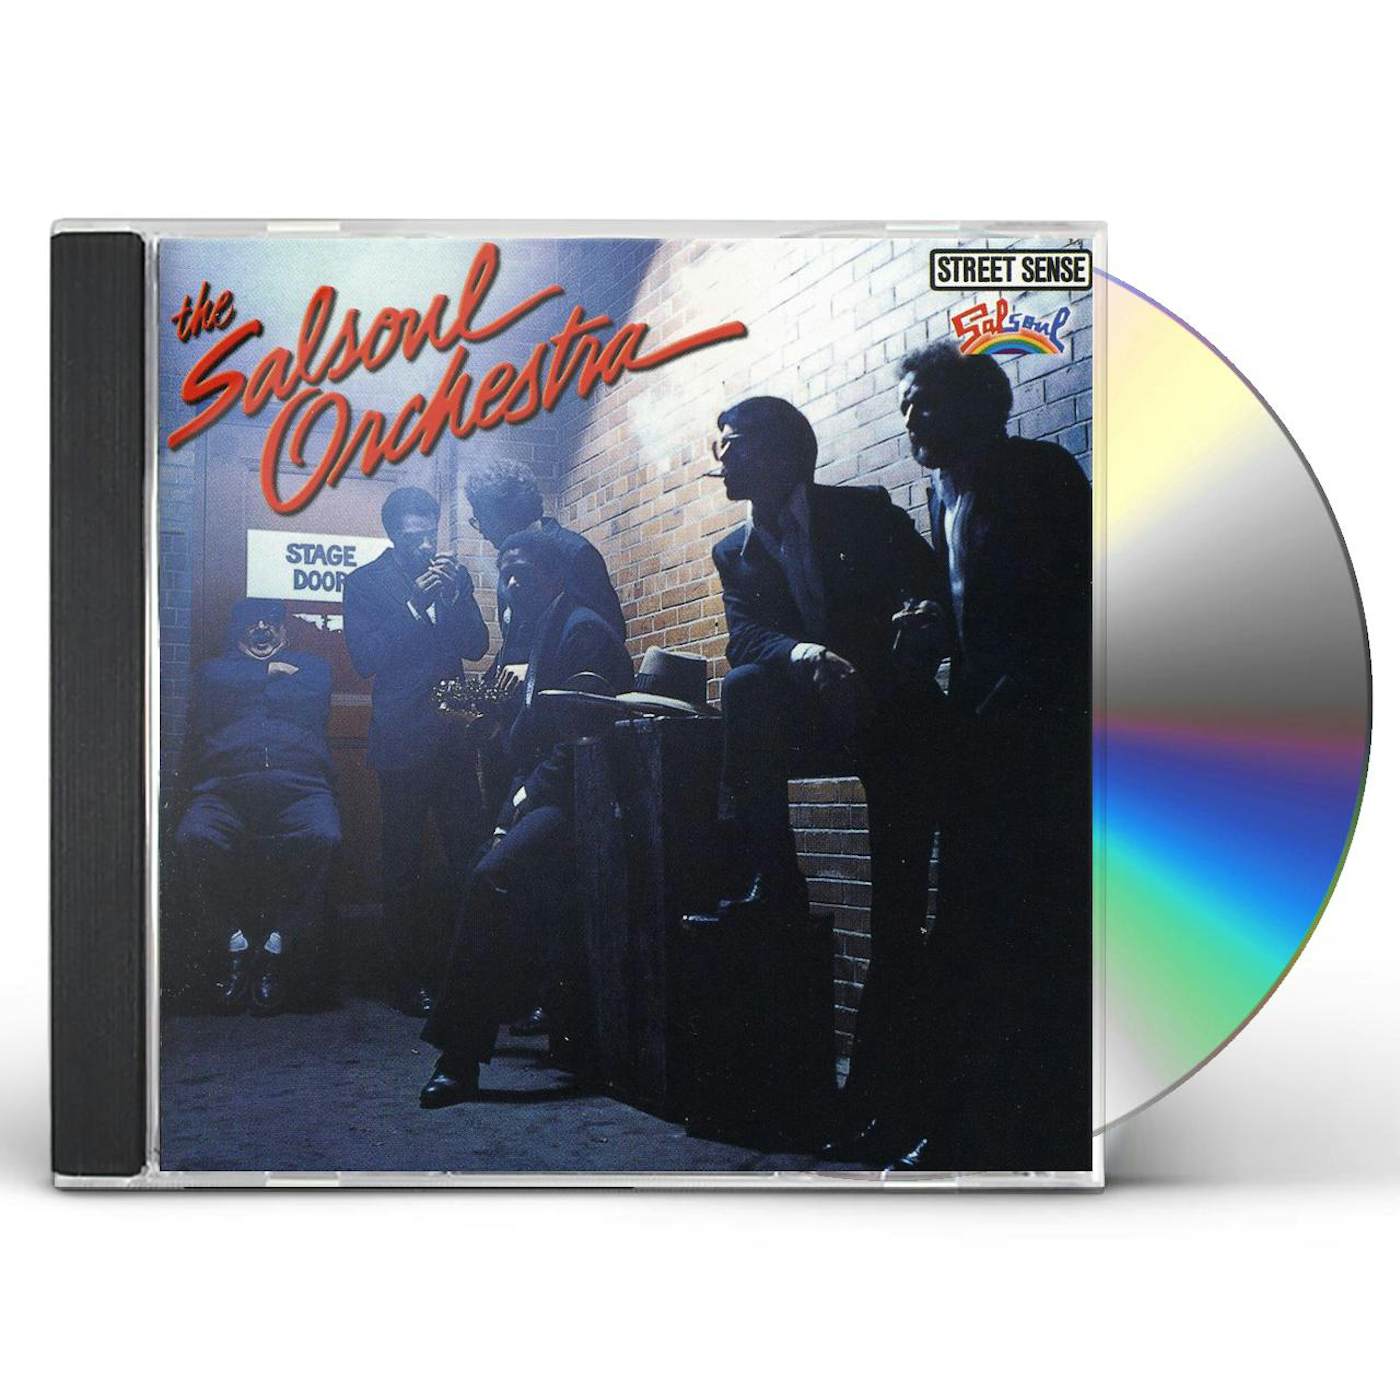 The Salsoul Orchestra STREET SENSE CD